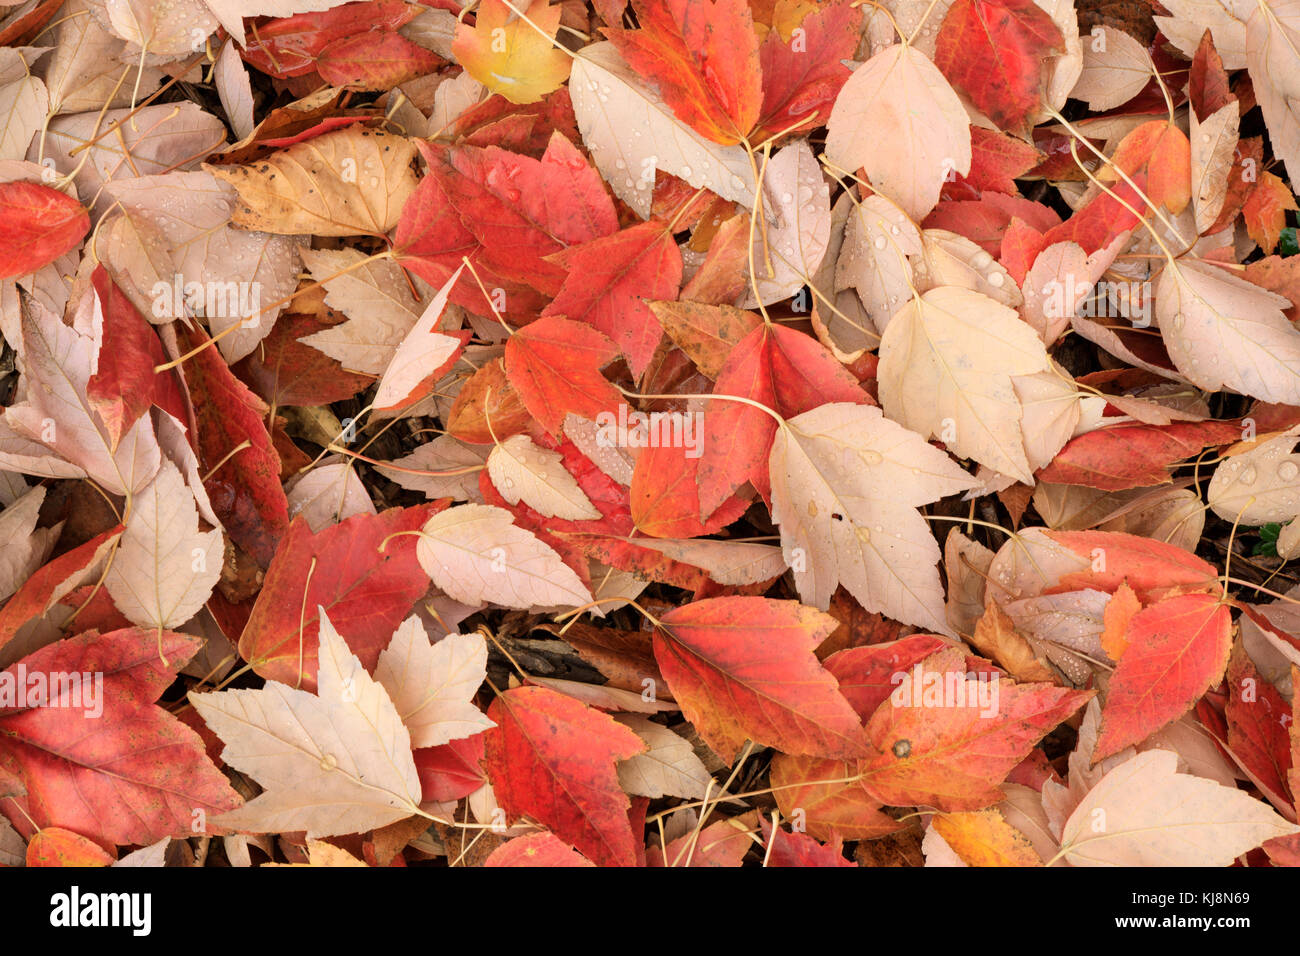 Red Maple Leaves in Autumn. Stock Photo